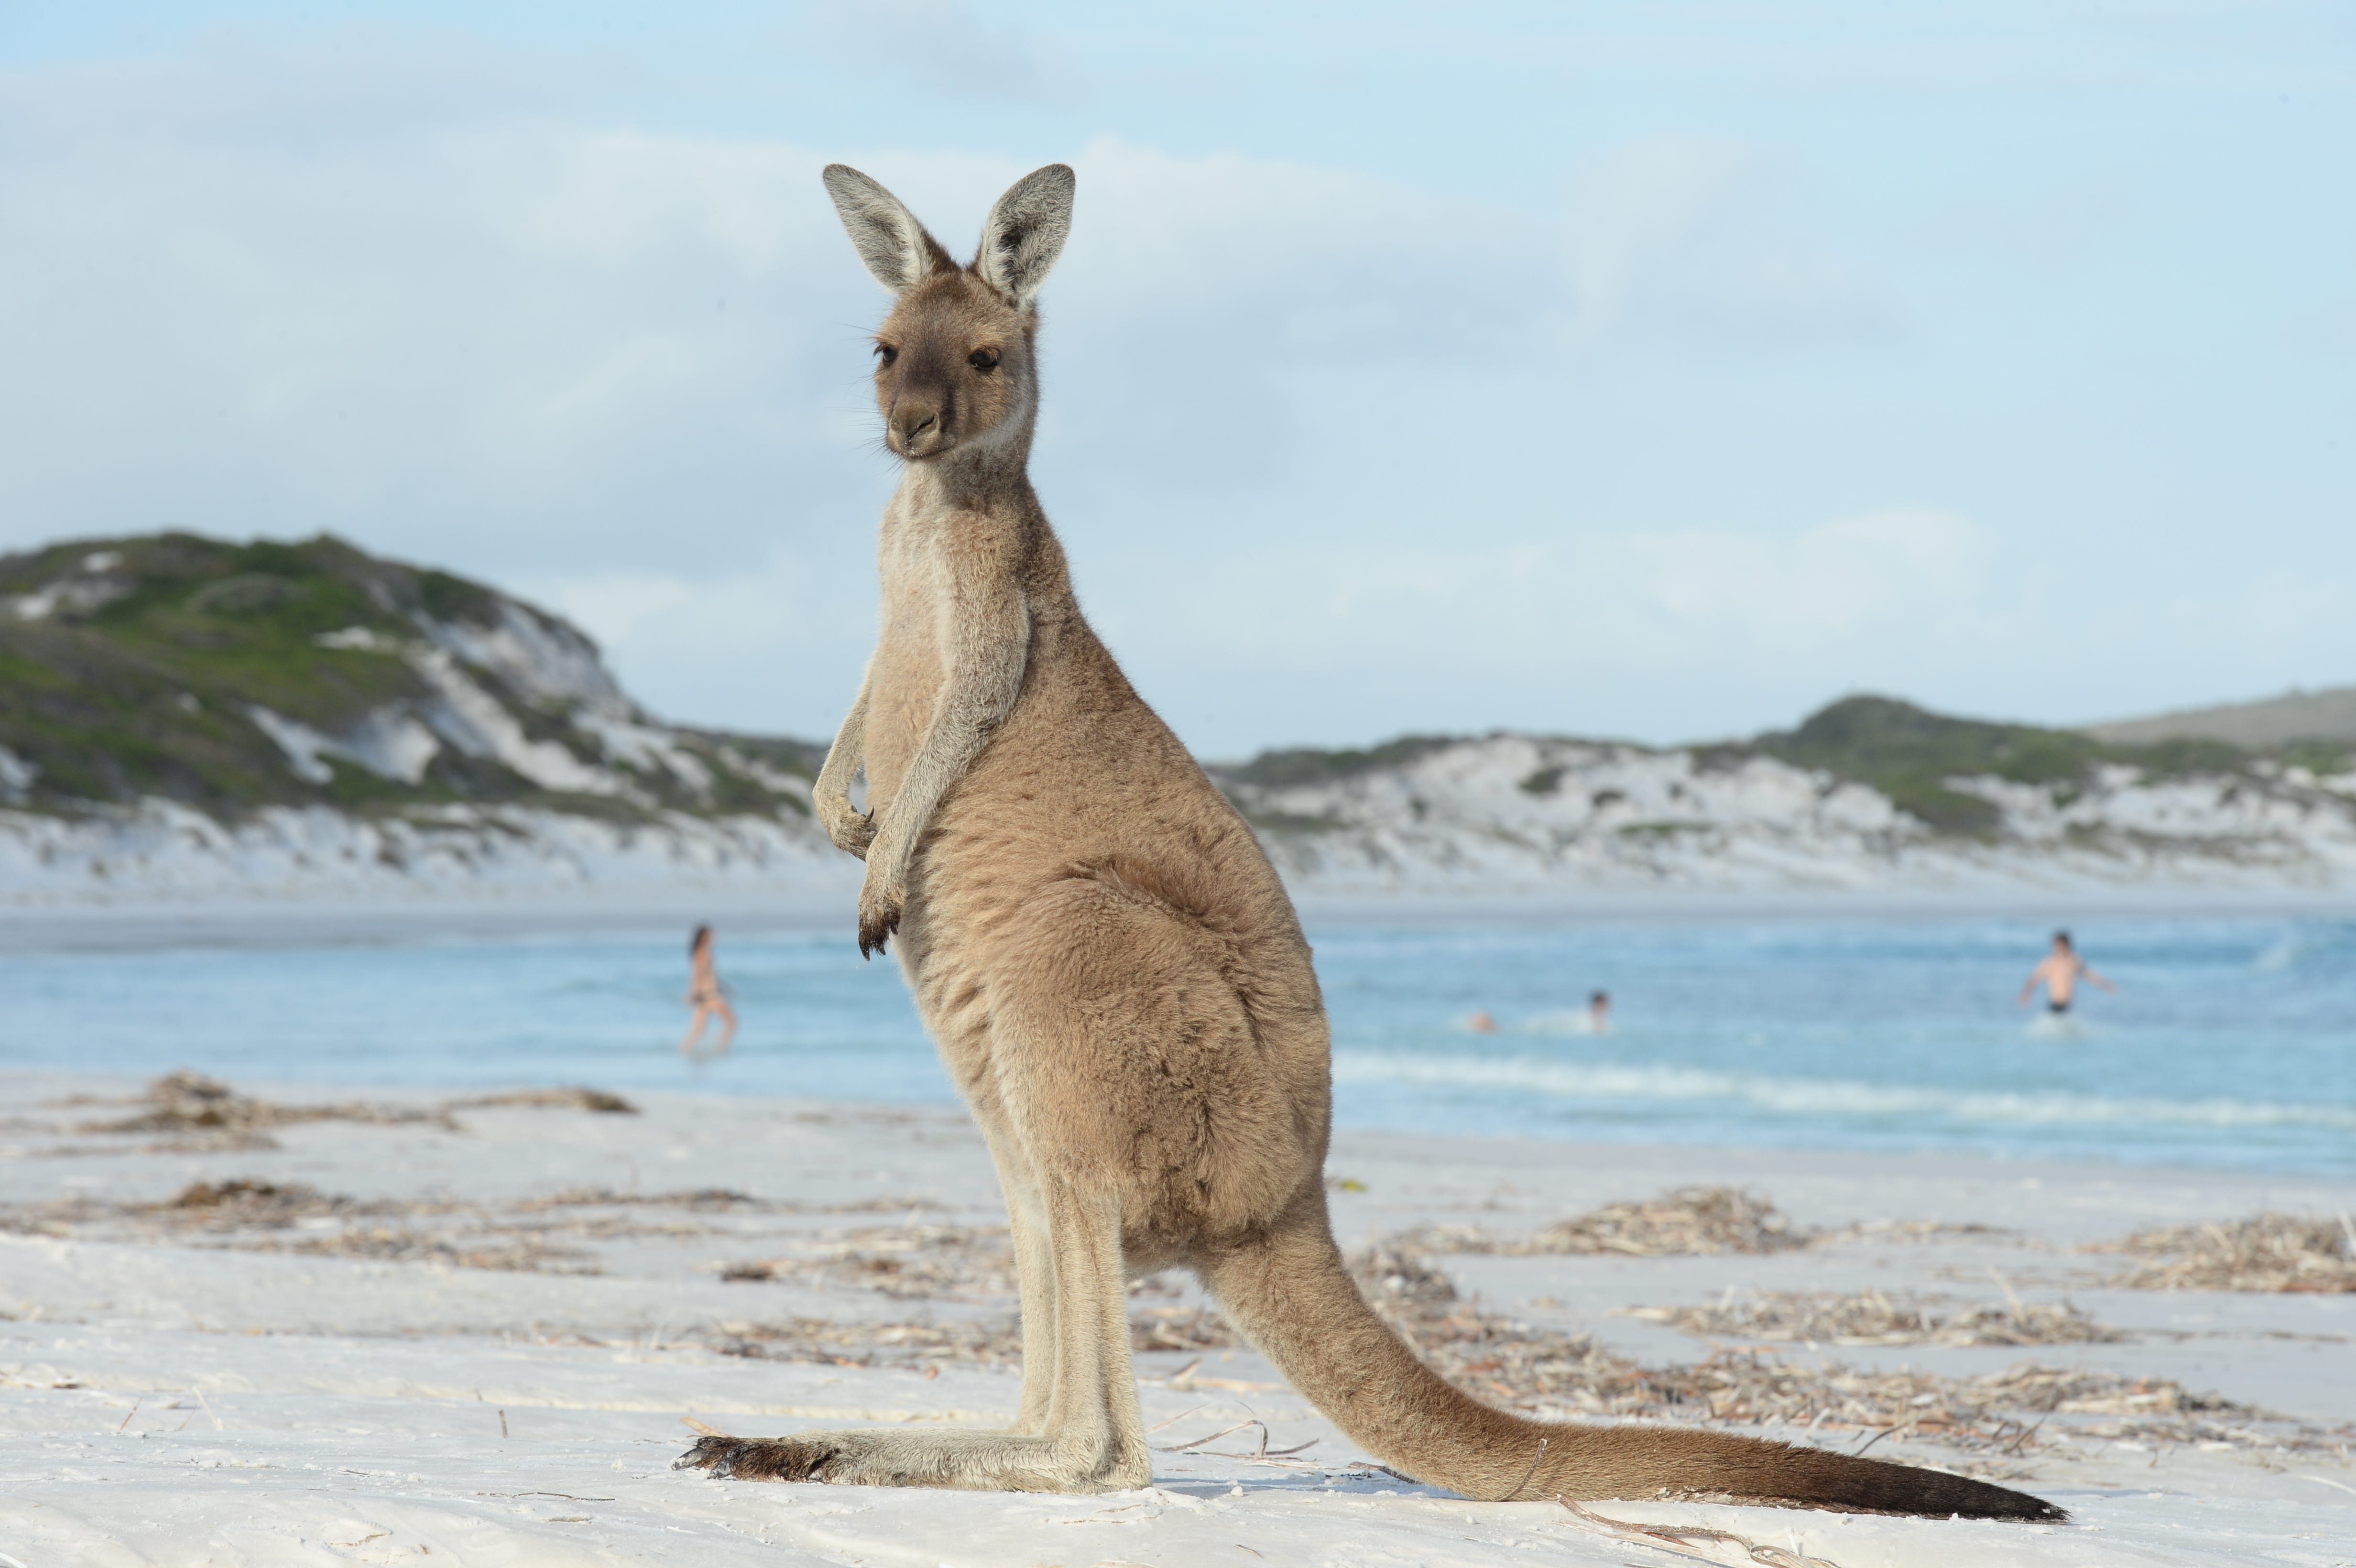 Kangaroos on the beach in Lucky Bay in the Cape Le Grand National Park on August 06, 2014 in Lucky Bay, Western Australia.